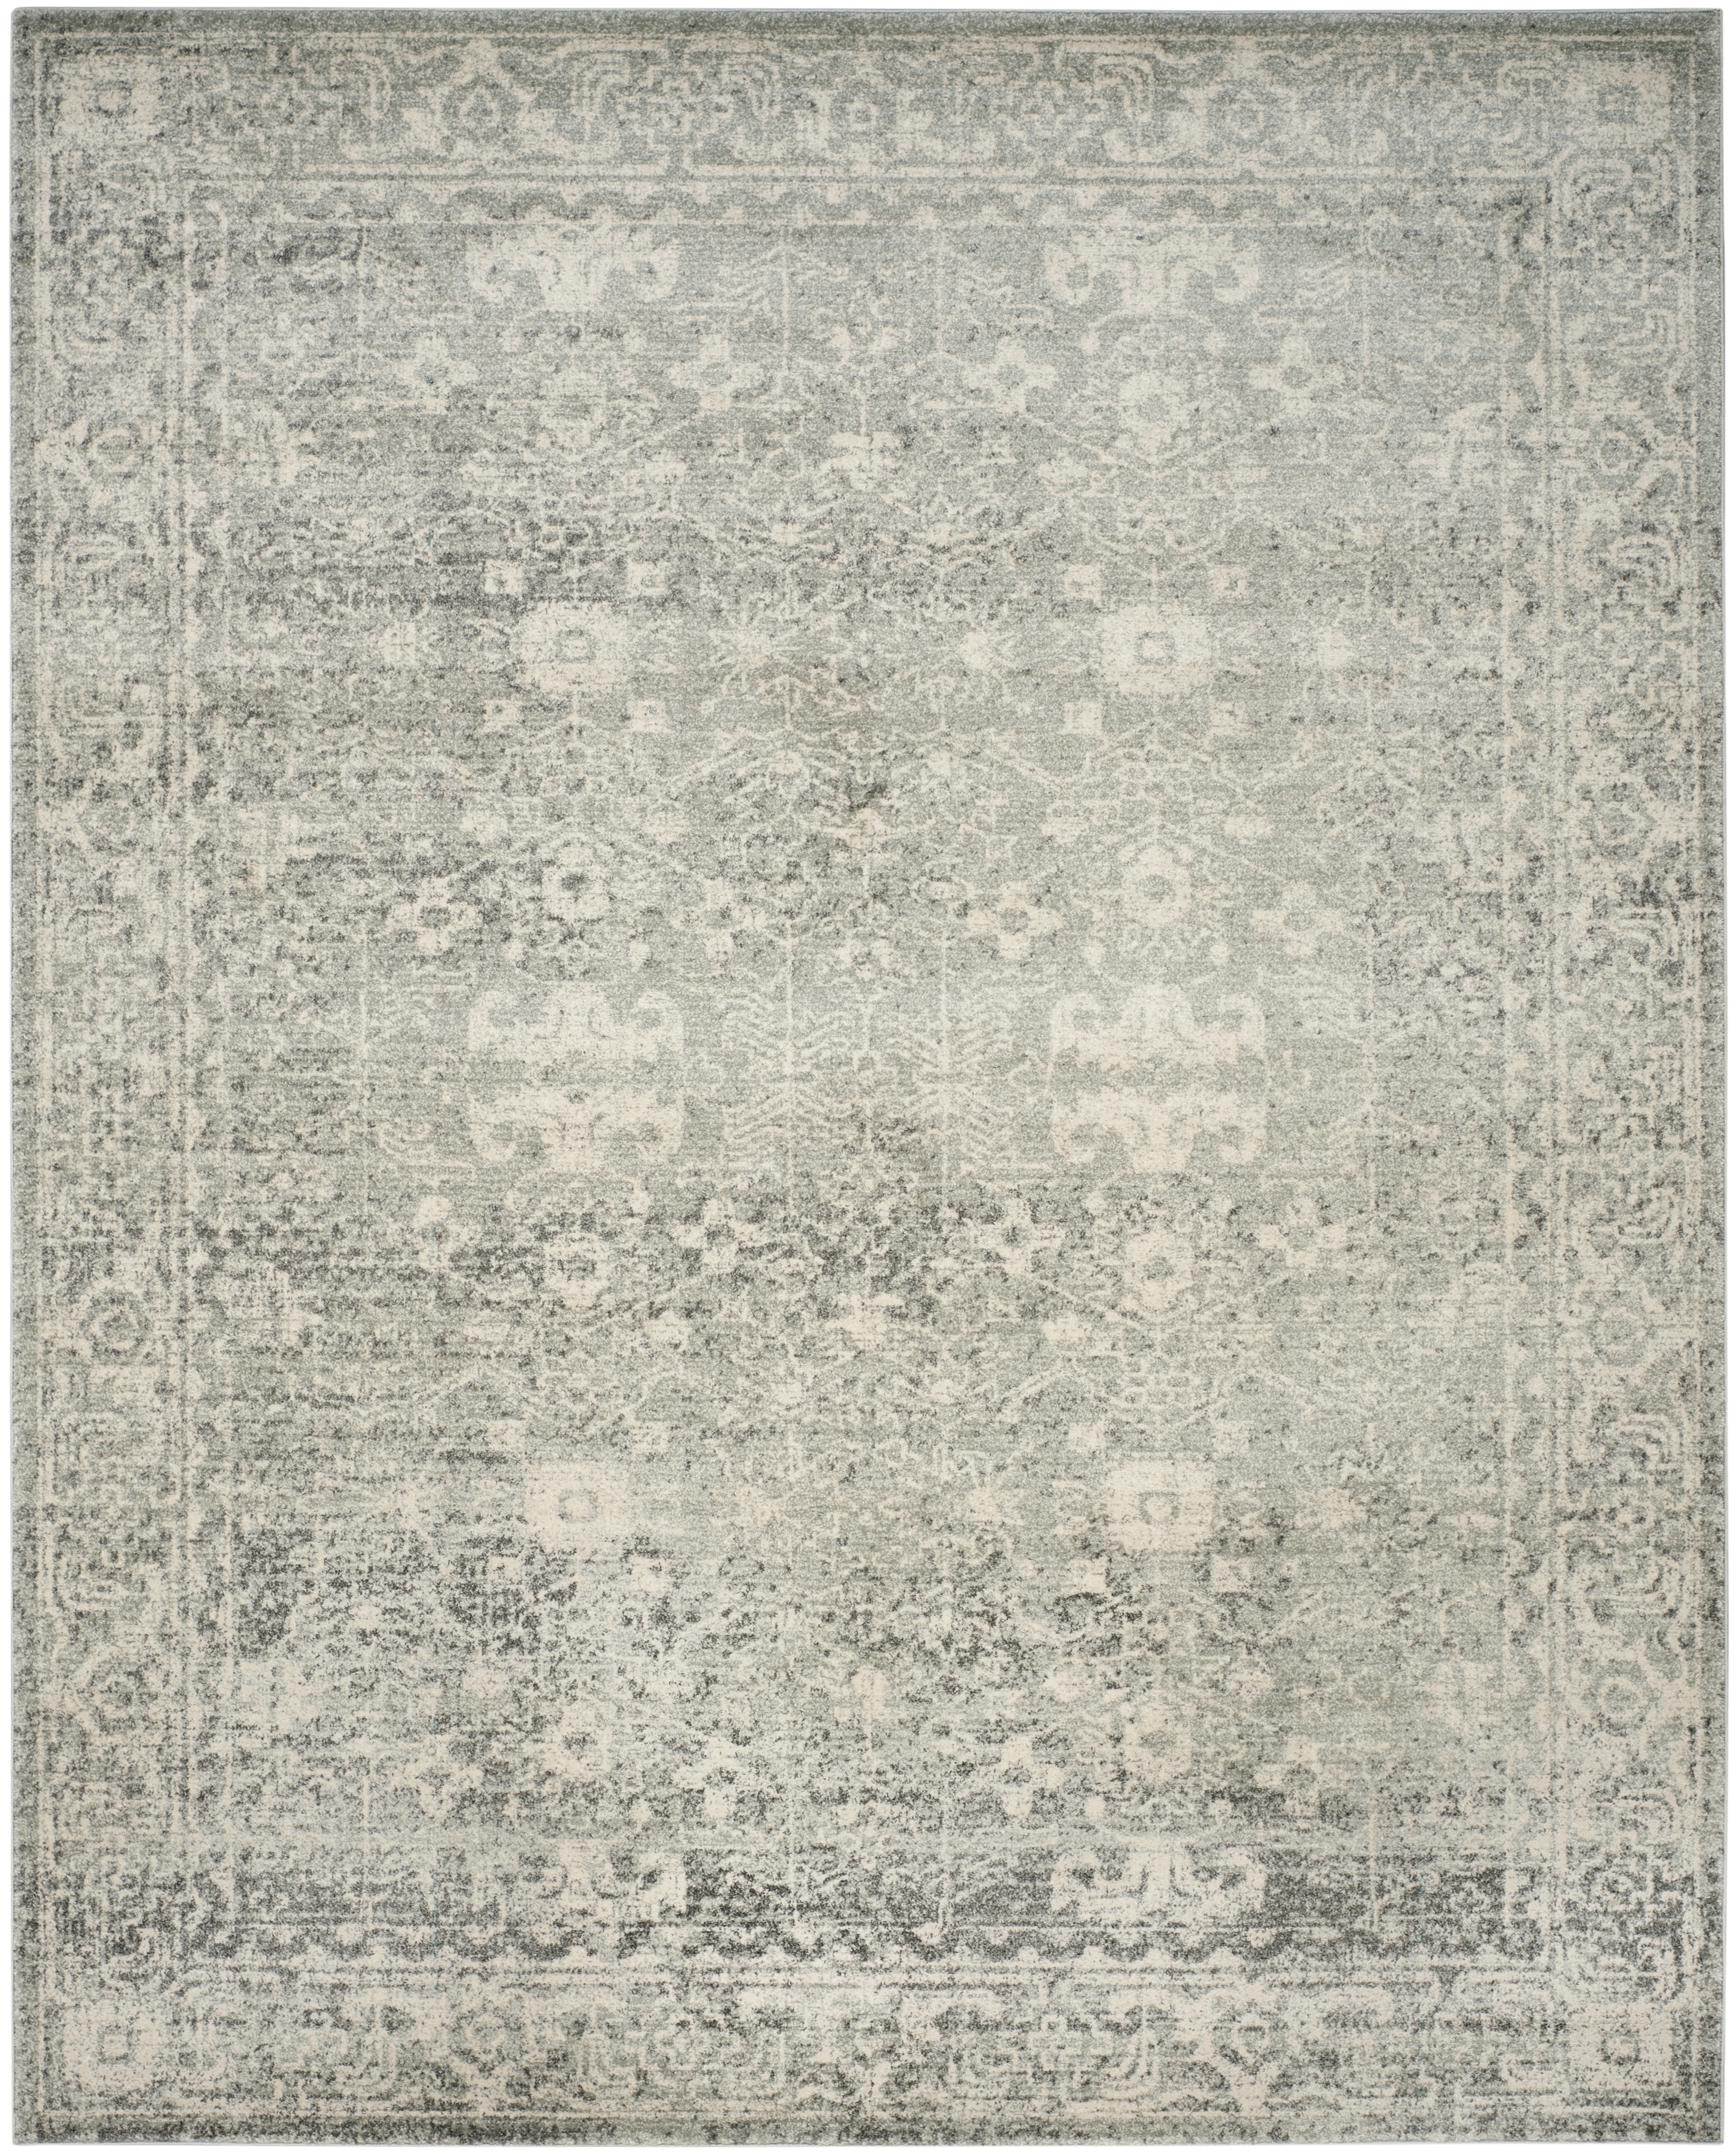 Arlo Home Woven Area Rug, EVK270Z, Silver/Ivory,  9' X 12' - Image 1